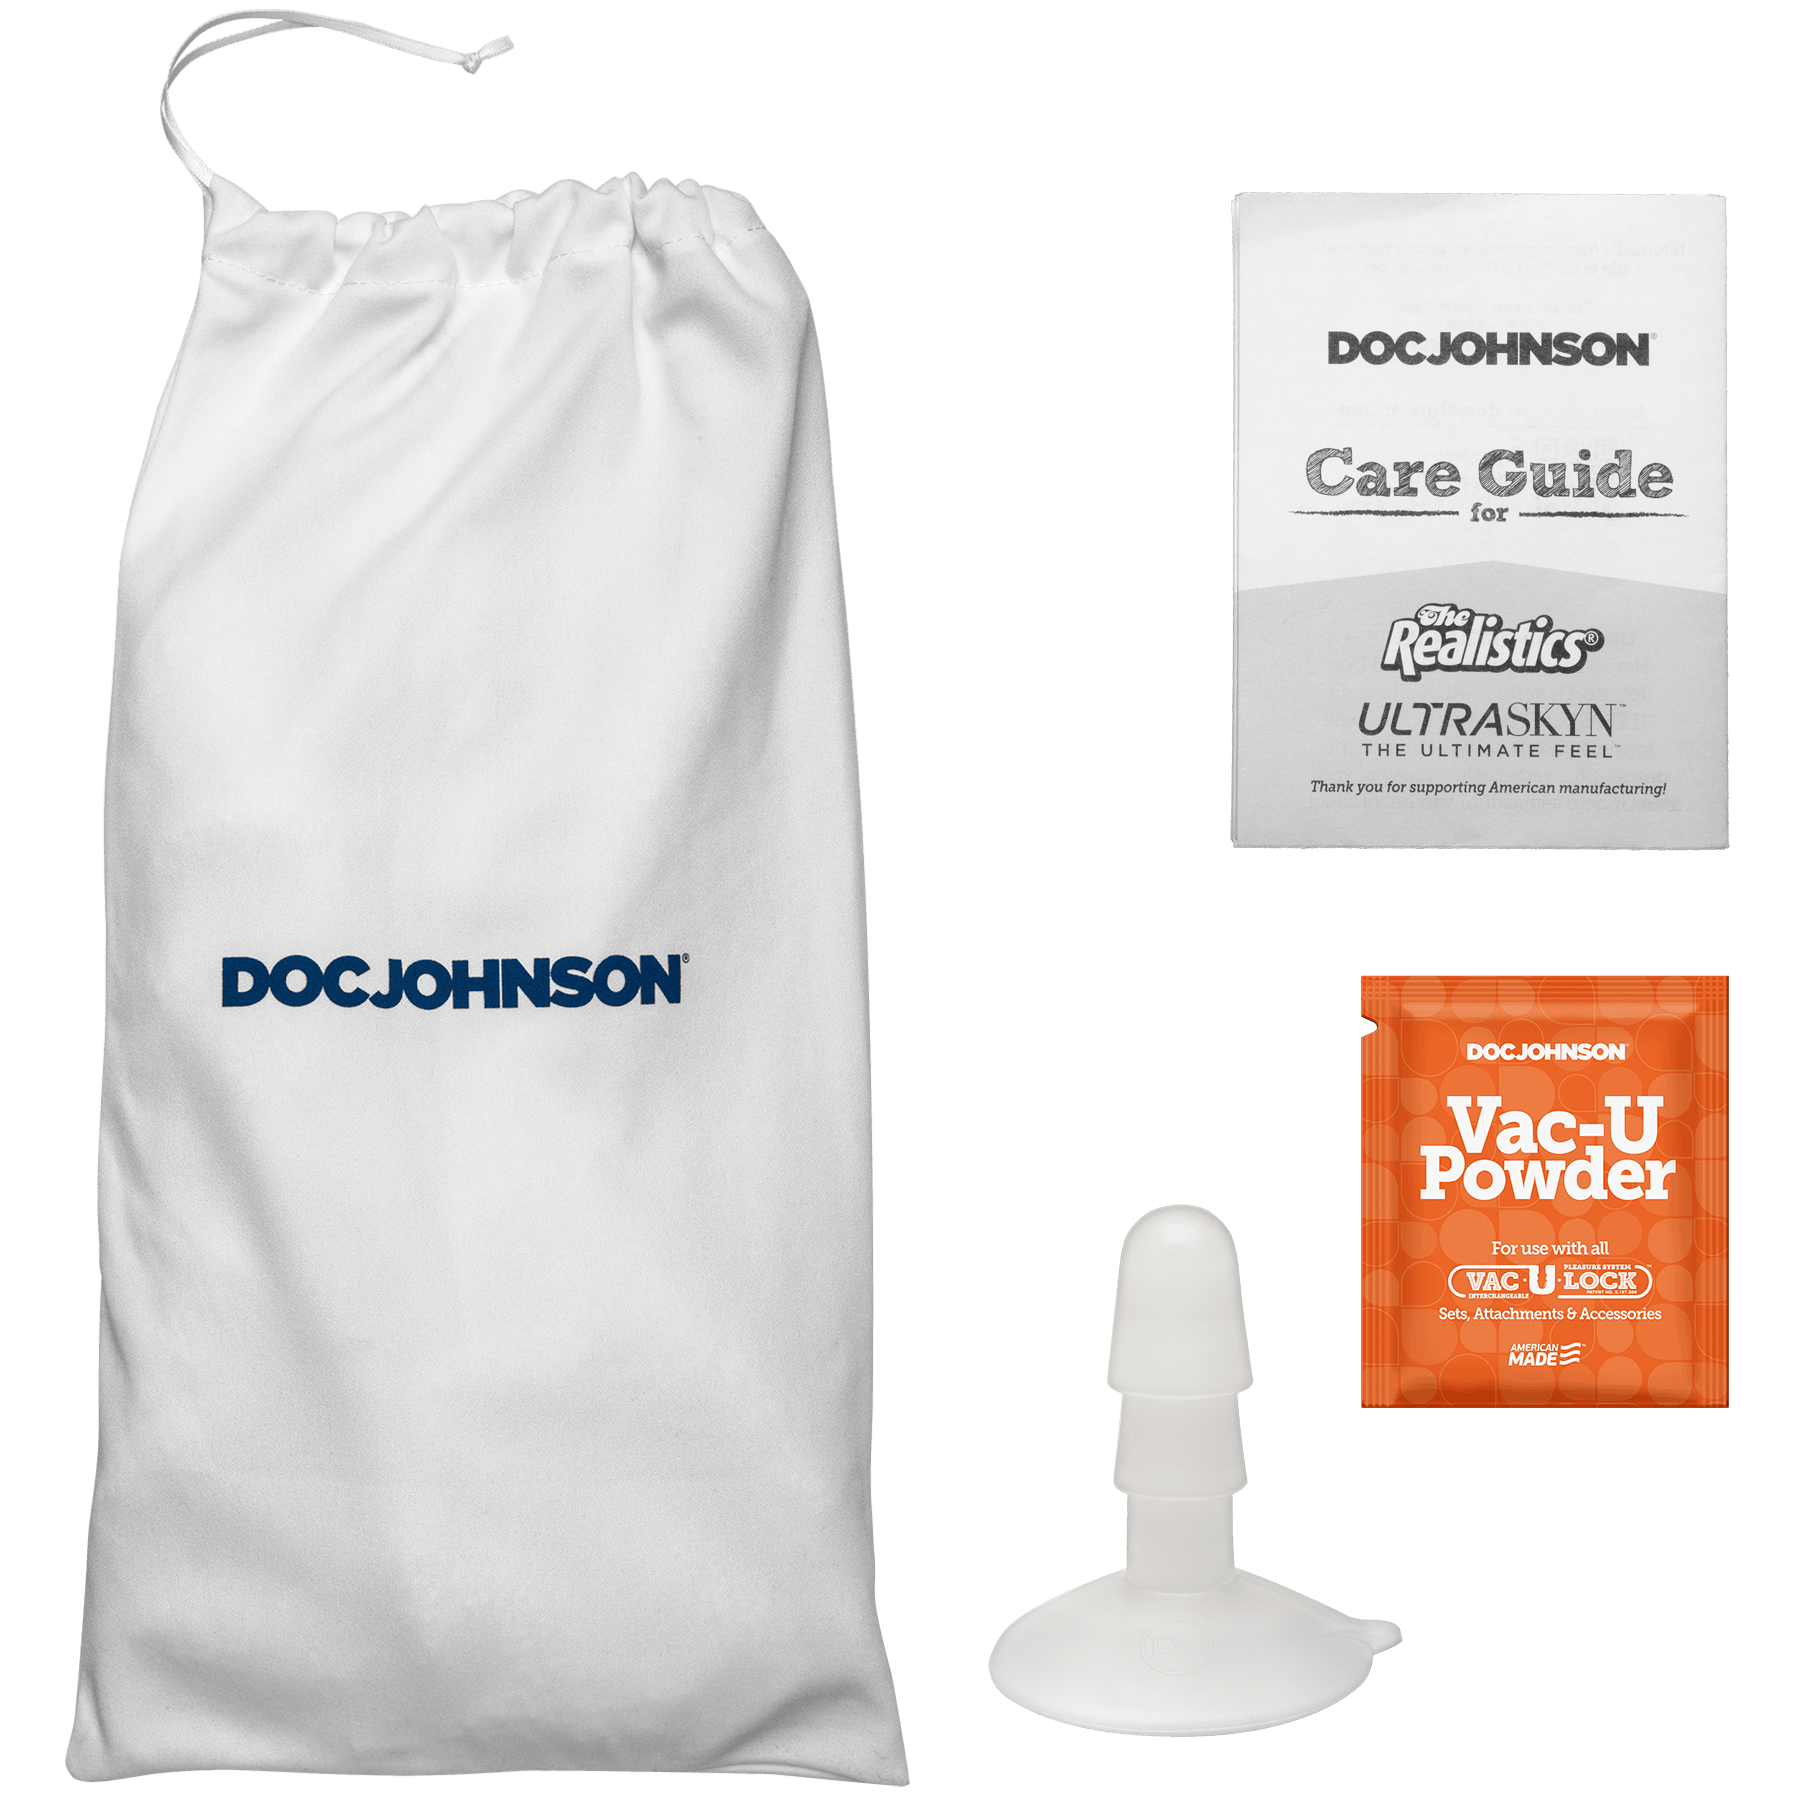 Doc Johnson Signature Cocks Xander Corvus Ultrask 7in Cock - Buy At Luxury Toy X - Free 3-Day Shipping